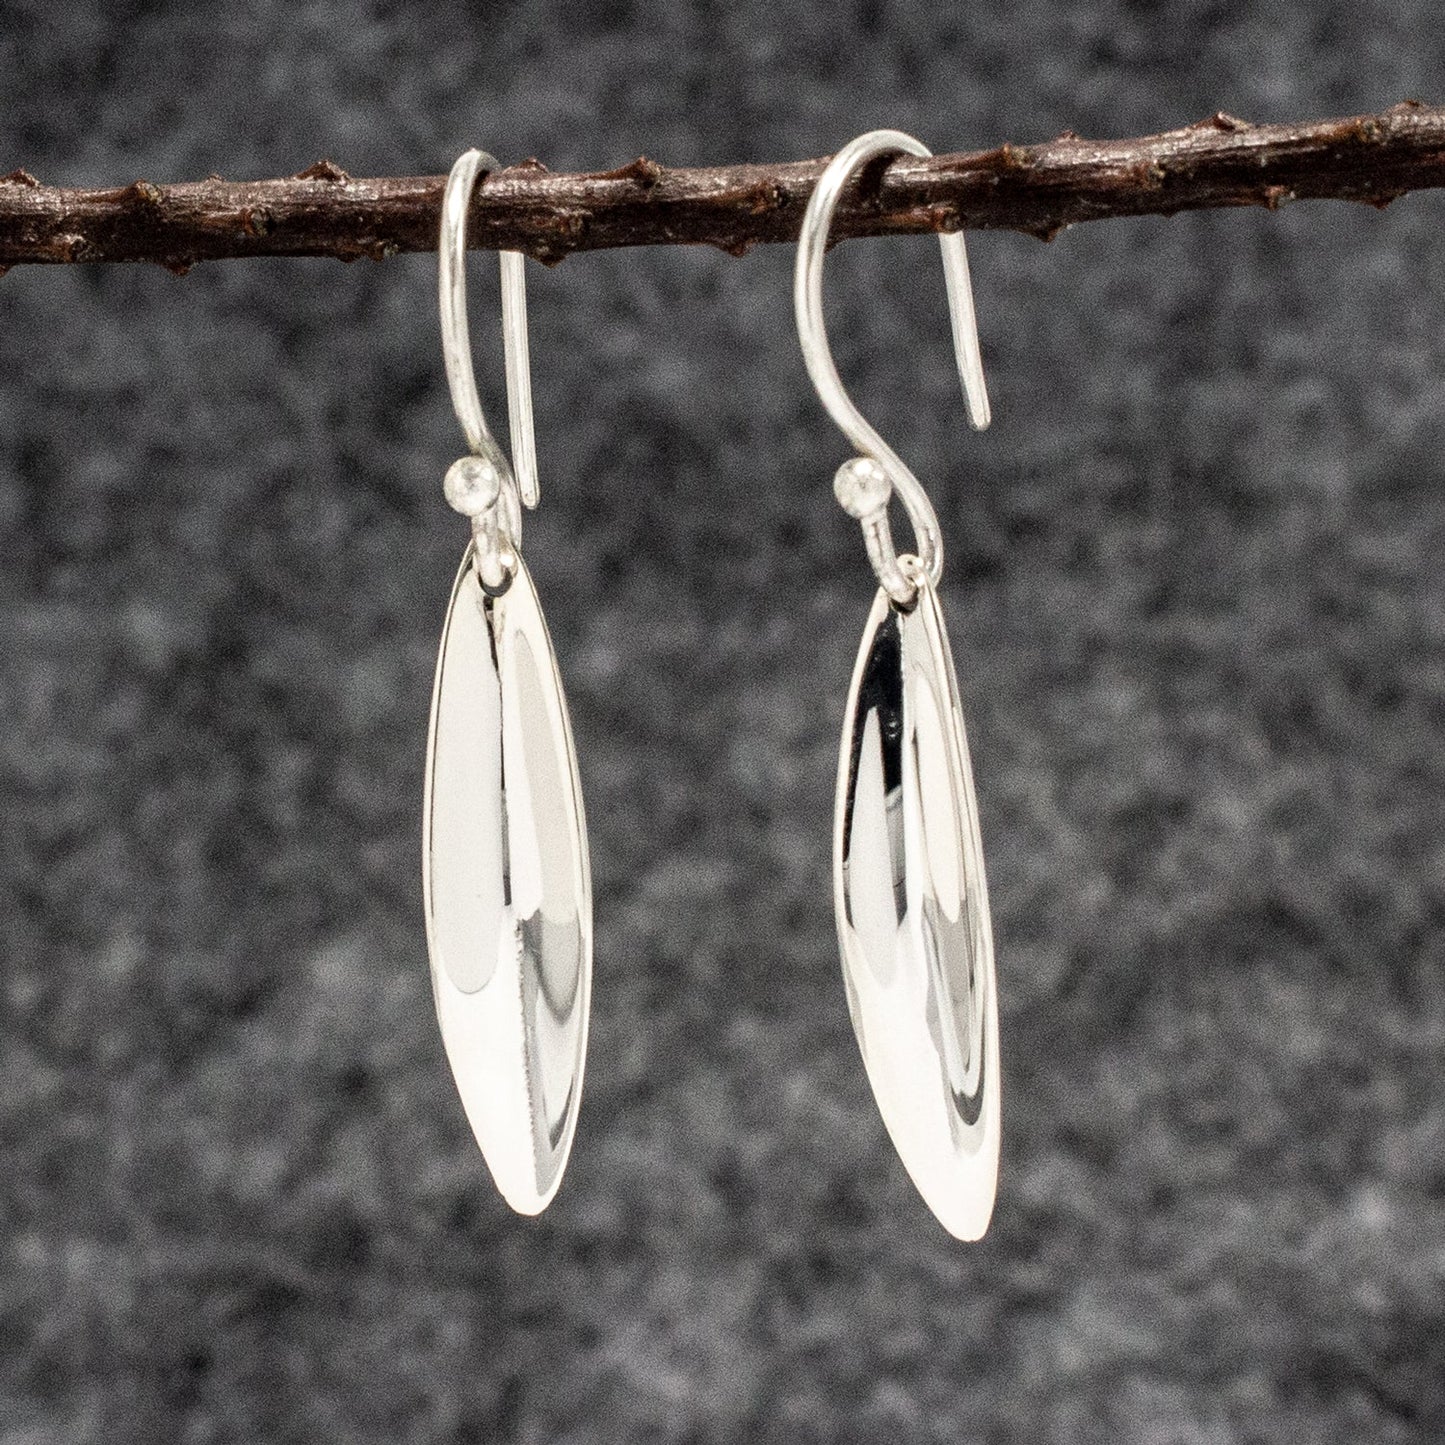 Selene - Pod Medium Silver Earrings - Dangle Curated and designed by Emilio Sotelo Jewelry for Croi Kinsale Jewellery in Kinsale West Cork Ireland Europe. Find exceptional handmade silver and gold jewellery at affordable prices for birthday gifts and Christmas presents. Handcrafted Silver jewelry. Find the best affordable jewellery